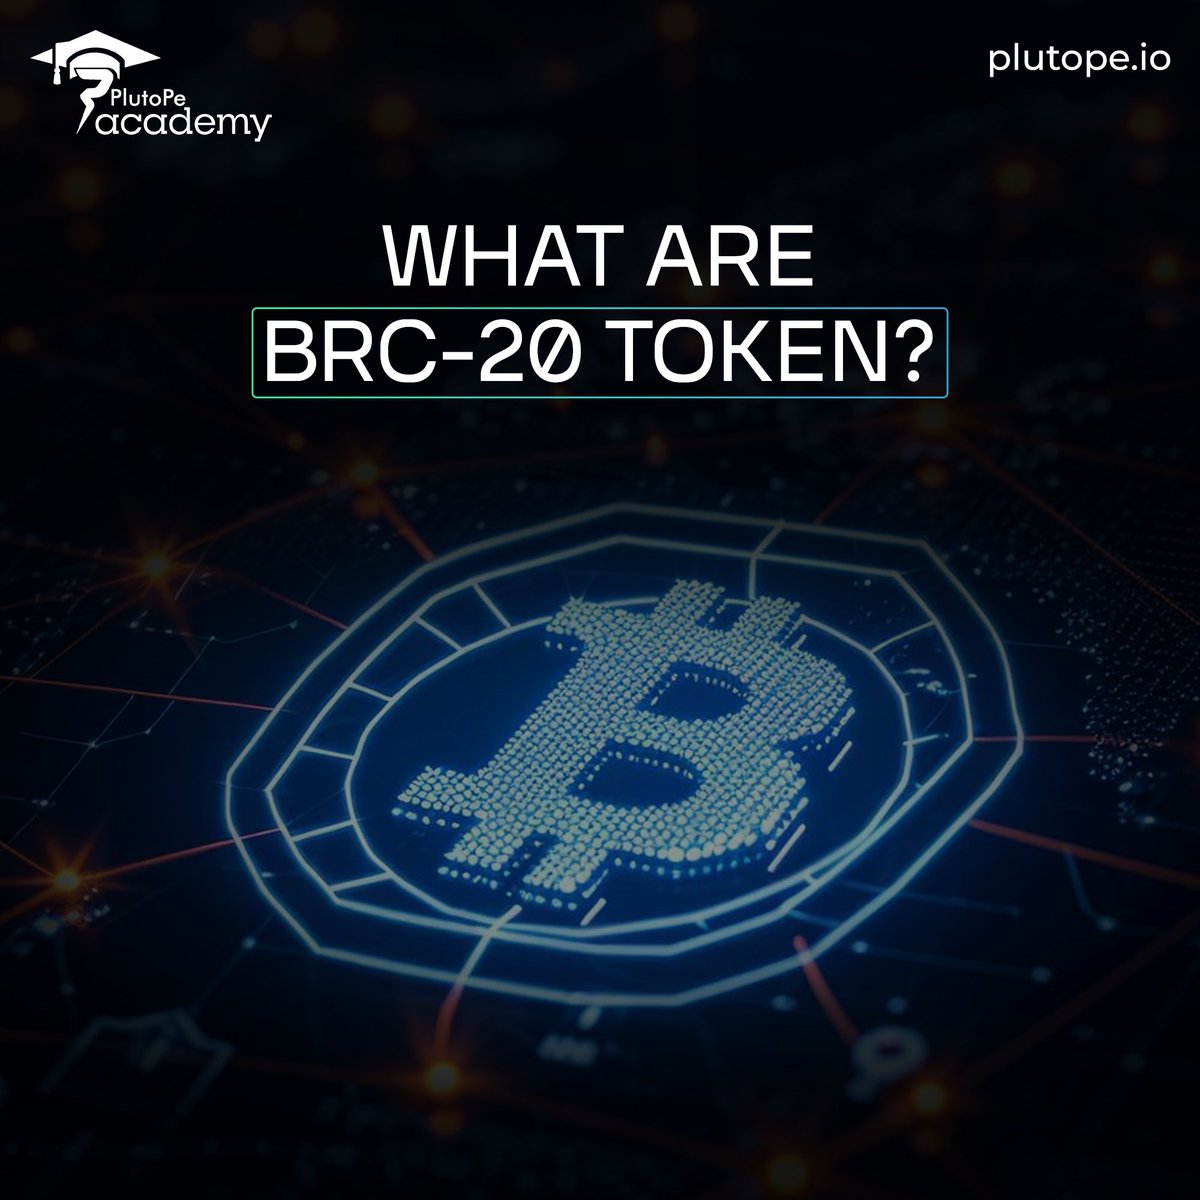 #Bitcoin “Magic Money”? It's tokens for #BRC-20! Do you recall using Paytm and GPay to make digital payments? Imagine that “magic internet money” could be used for more than just payments on Bitcoin! That's tokens for BRC-20! Consider it this way: 👀 Bitcoin is only useful for